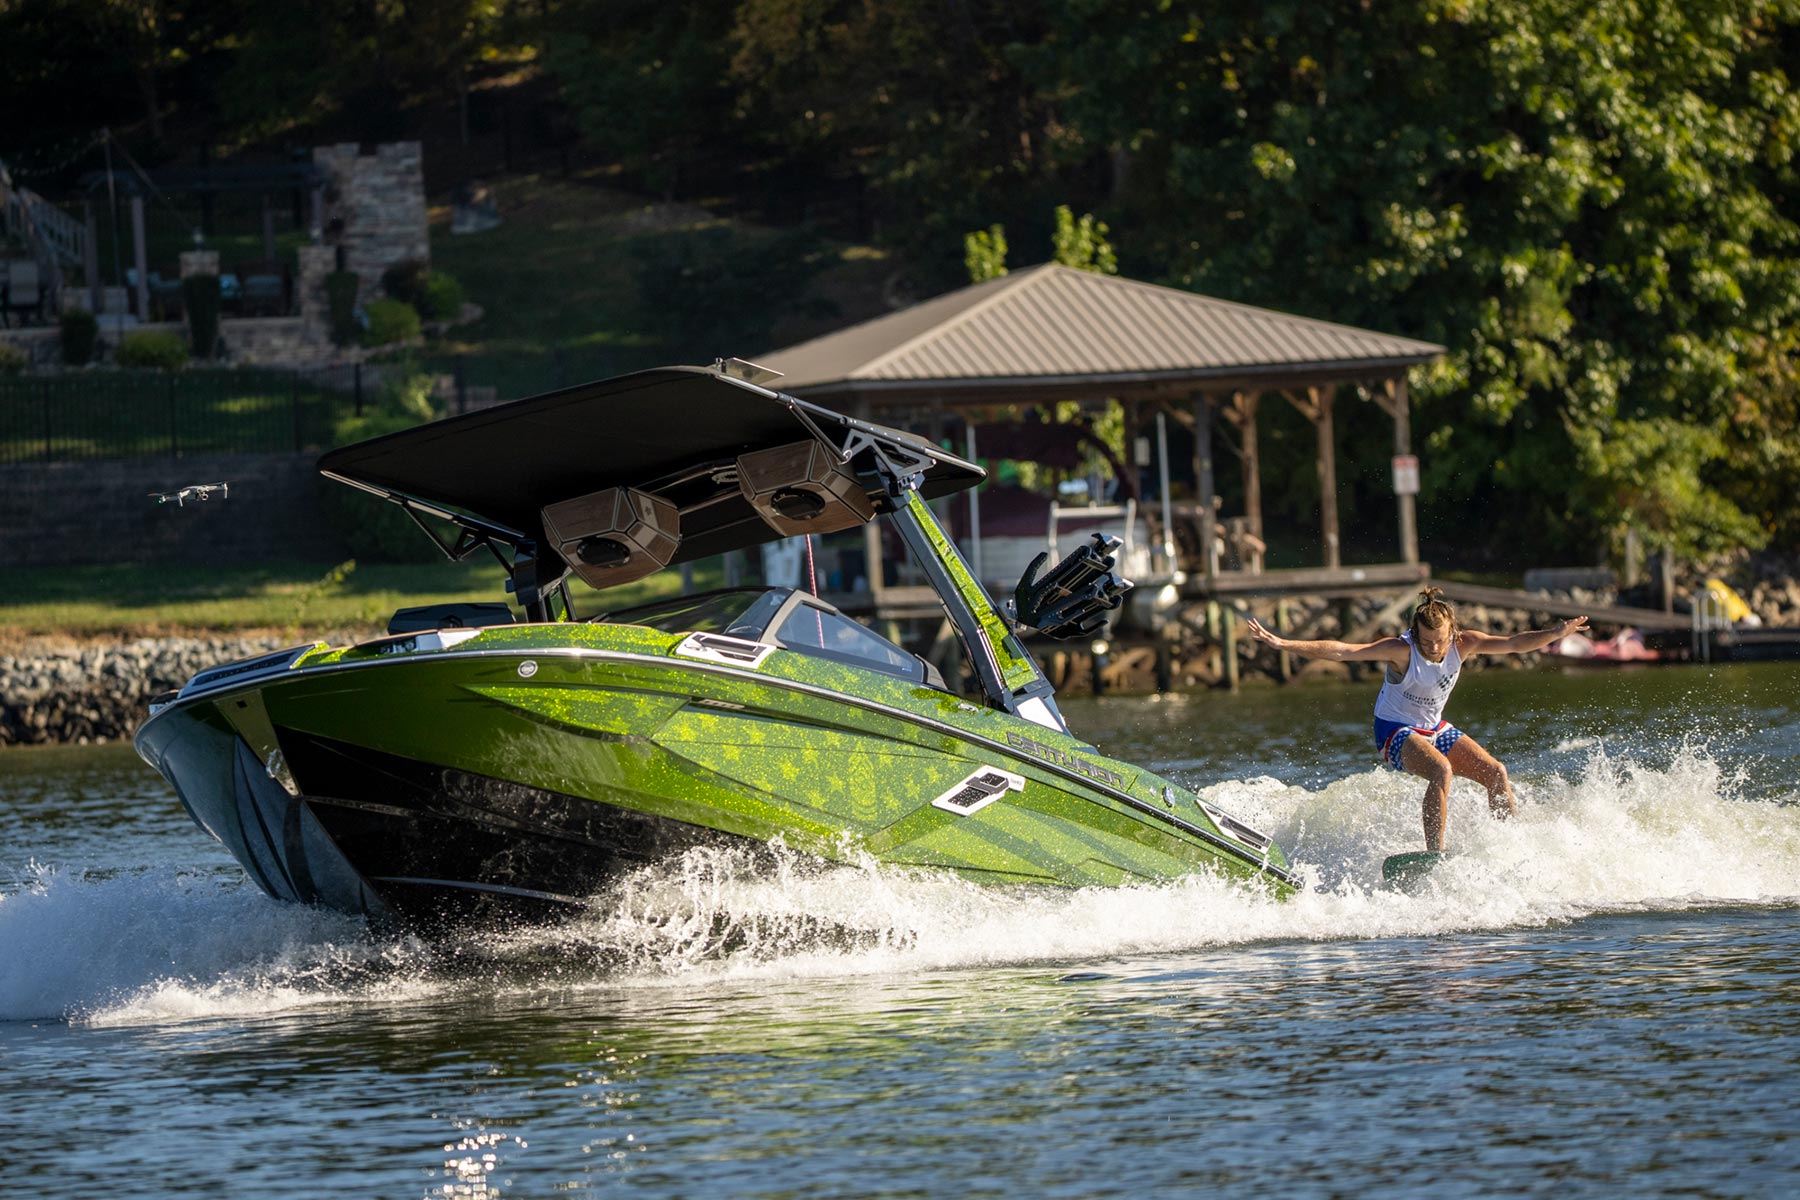 A woman is wake surfing on a green boat.